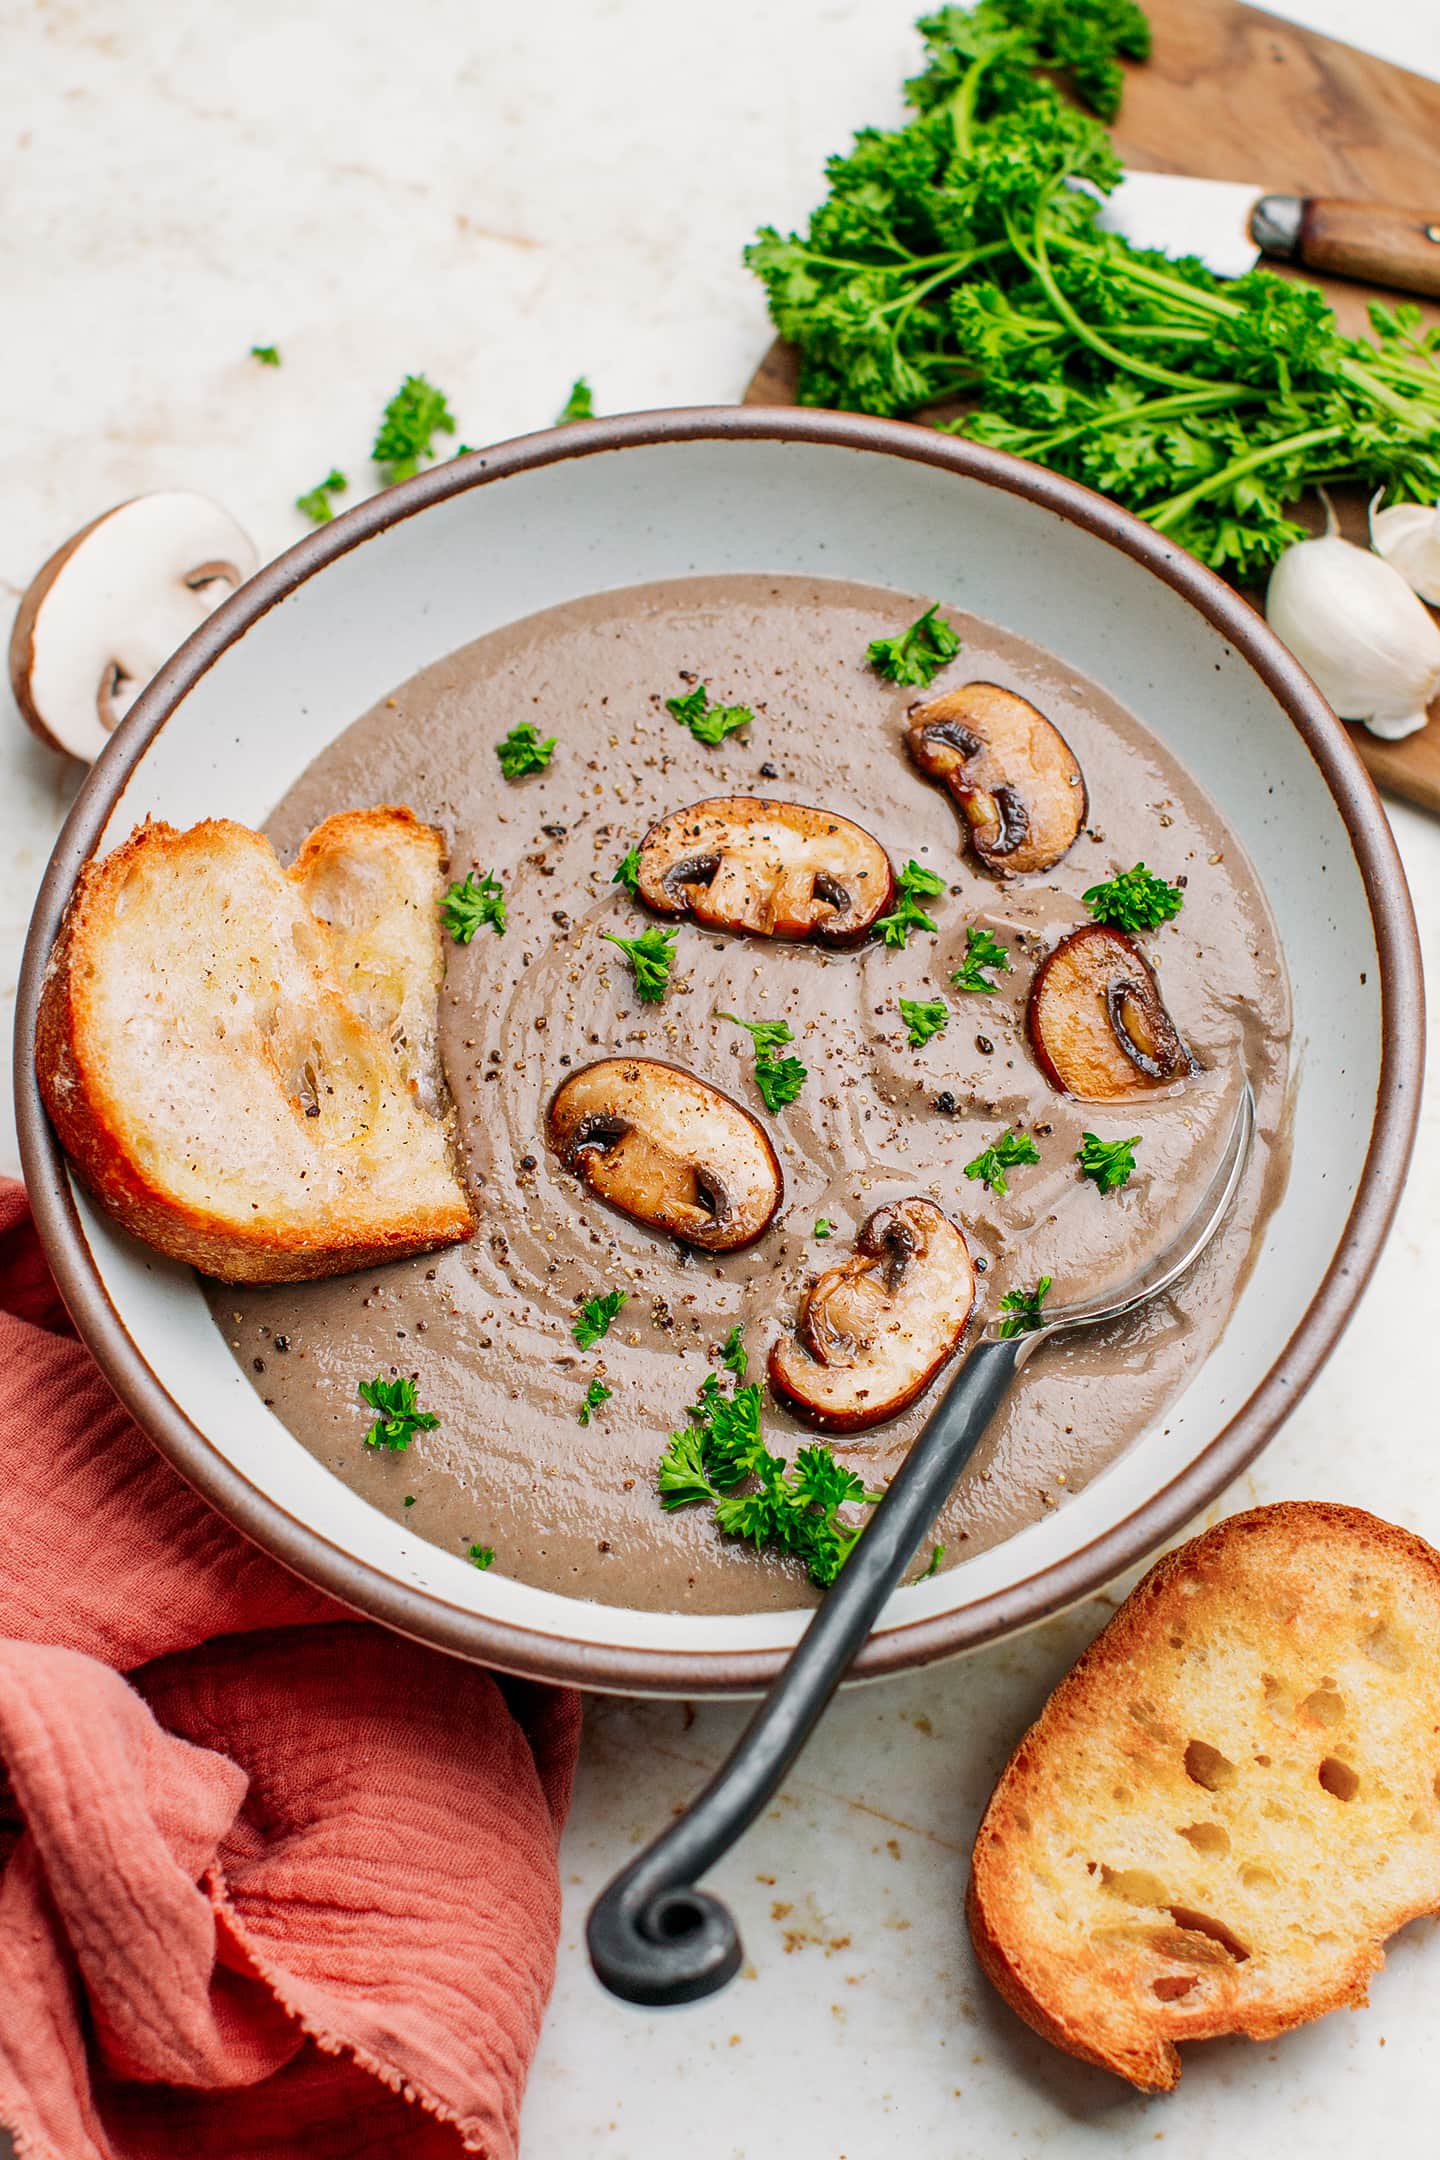 Mushroom soup topped with parsley and served with toasted bread.